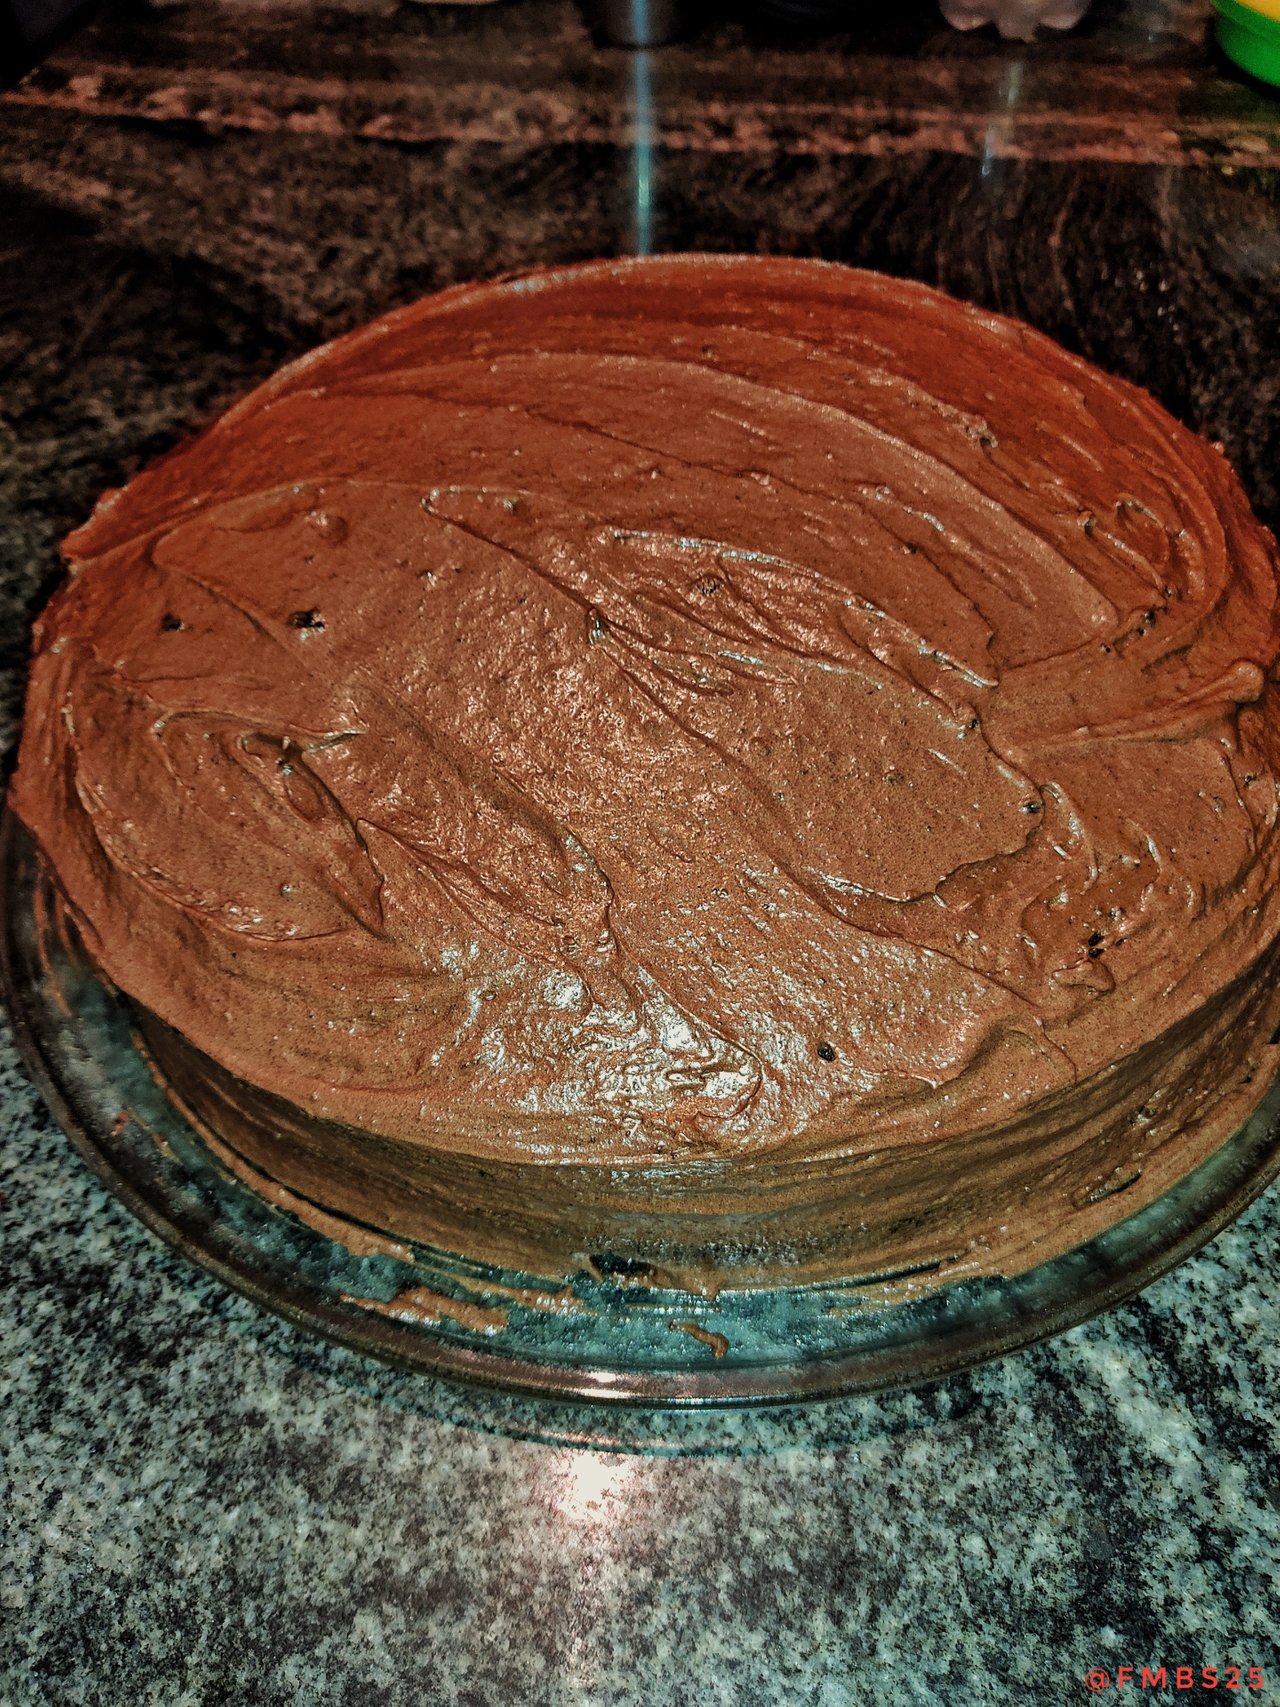 A Witch in the Kitchen: Chocolate Cake (Like Matilda's) - For my brother's  birthday [EN] // Una Bruja en la Cocina: Pastel de Chocolate (Como el de  Matilda) - Para el cumpleaños